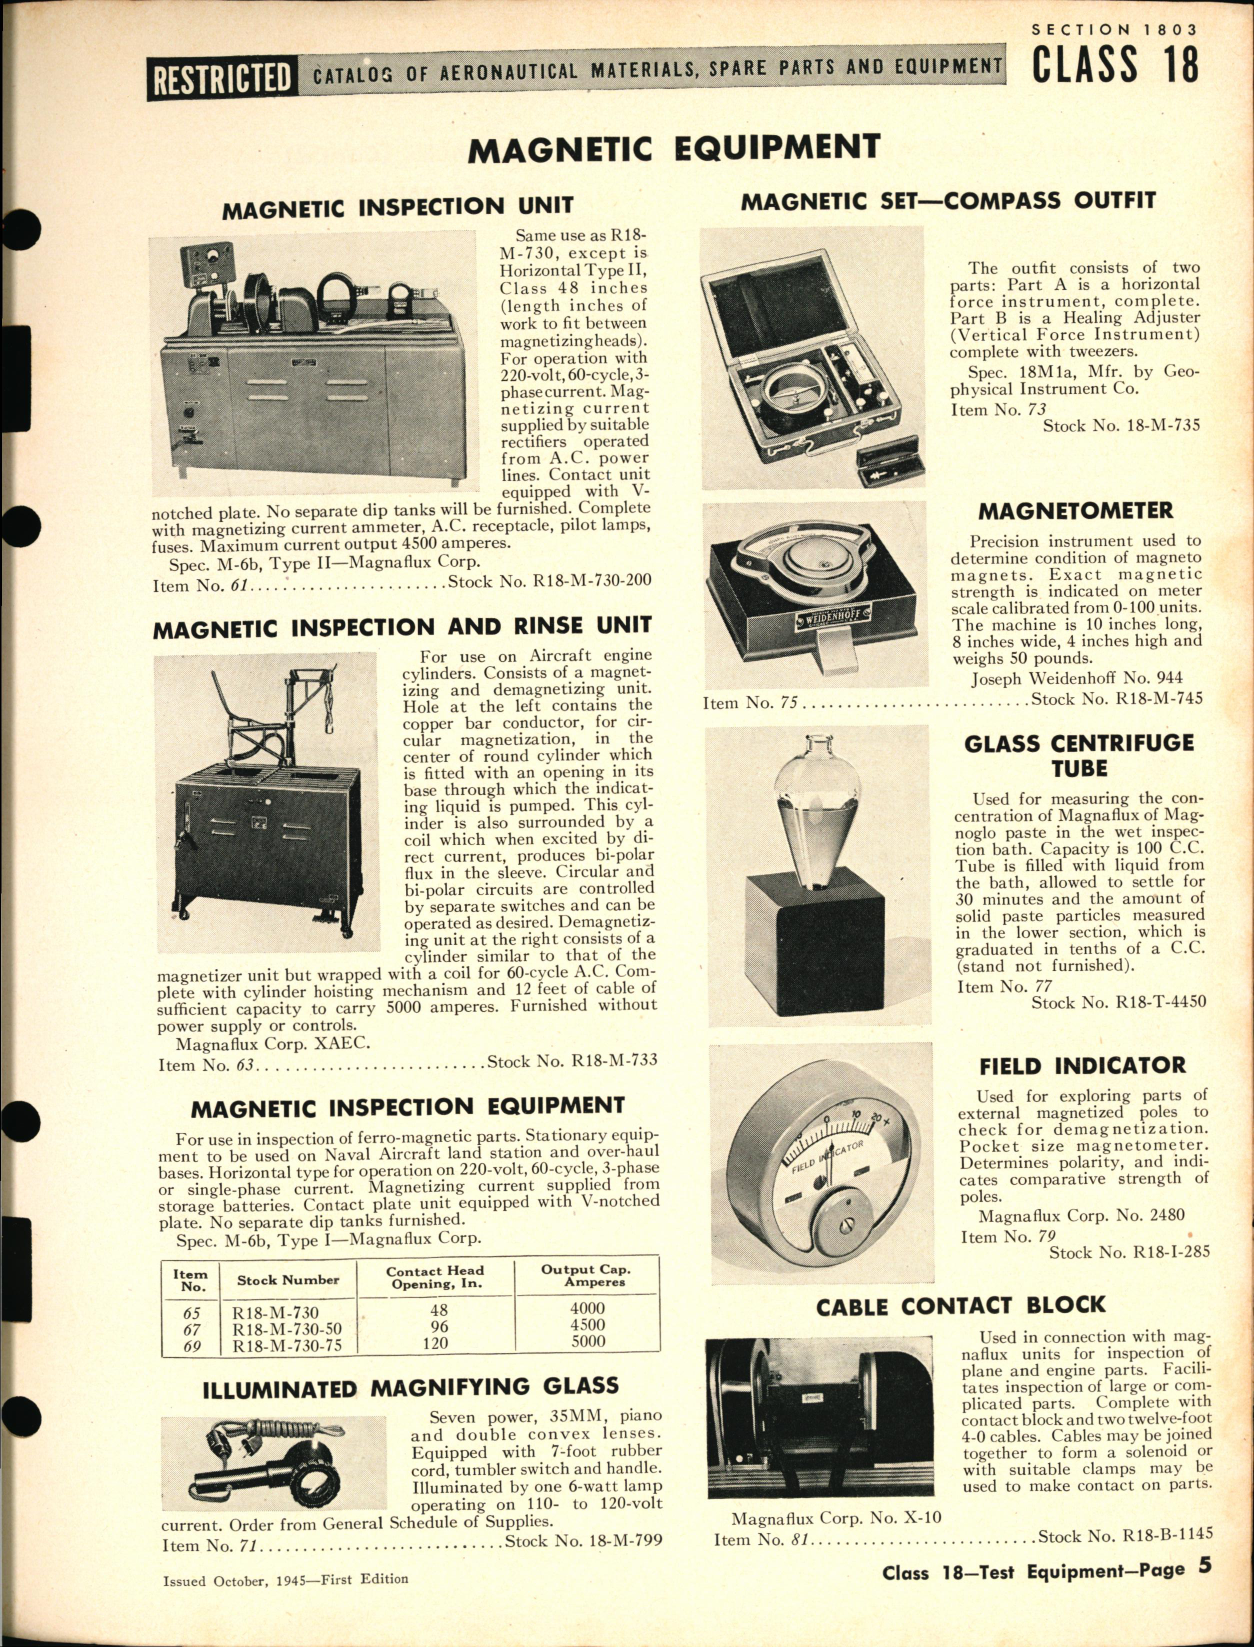 Sample page 5 from AirCorps Library document: Test Equipment